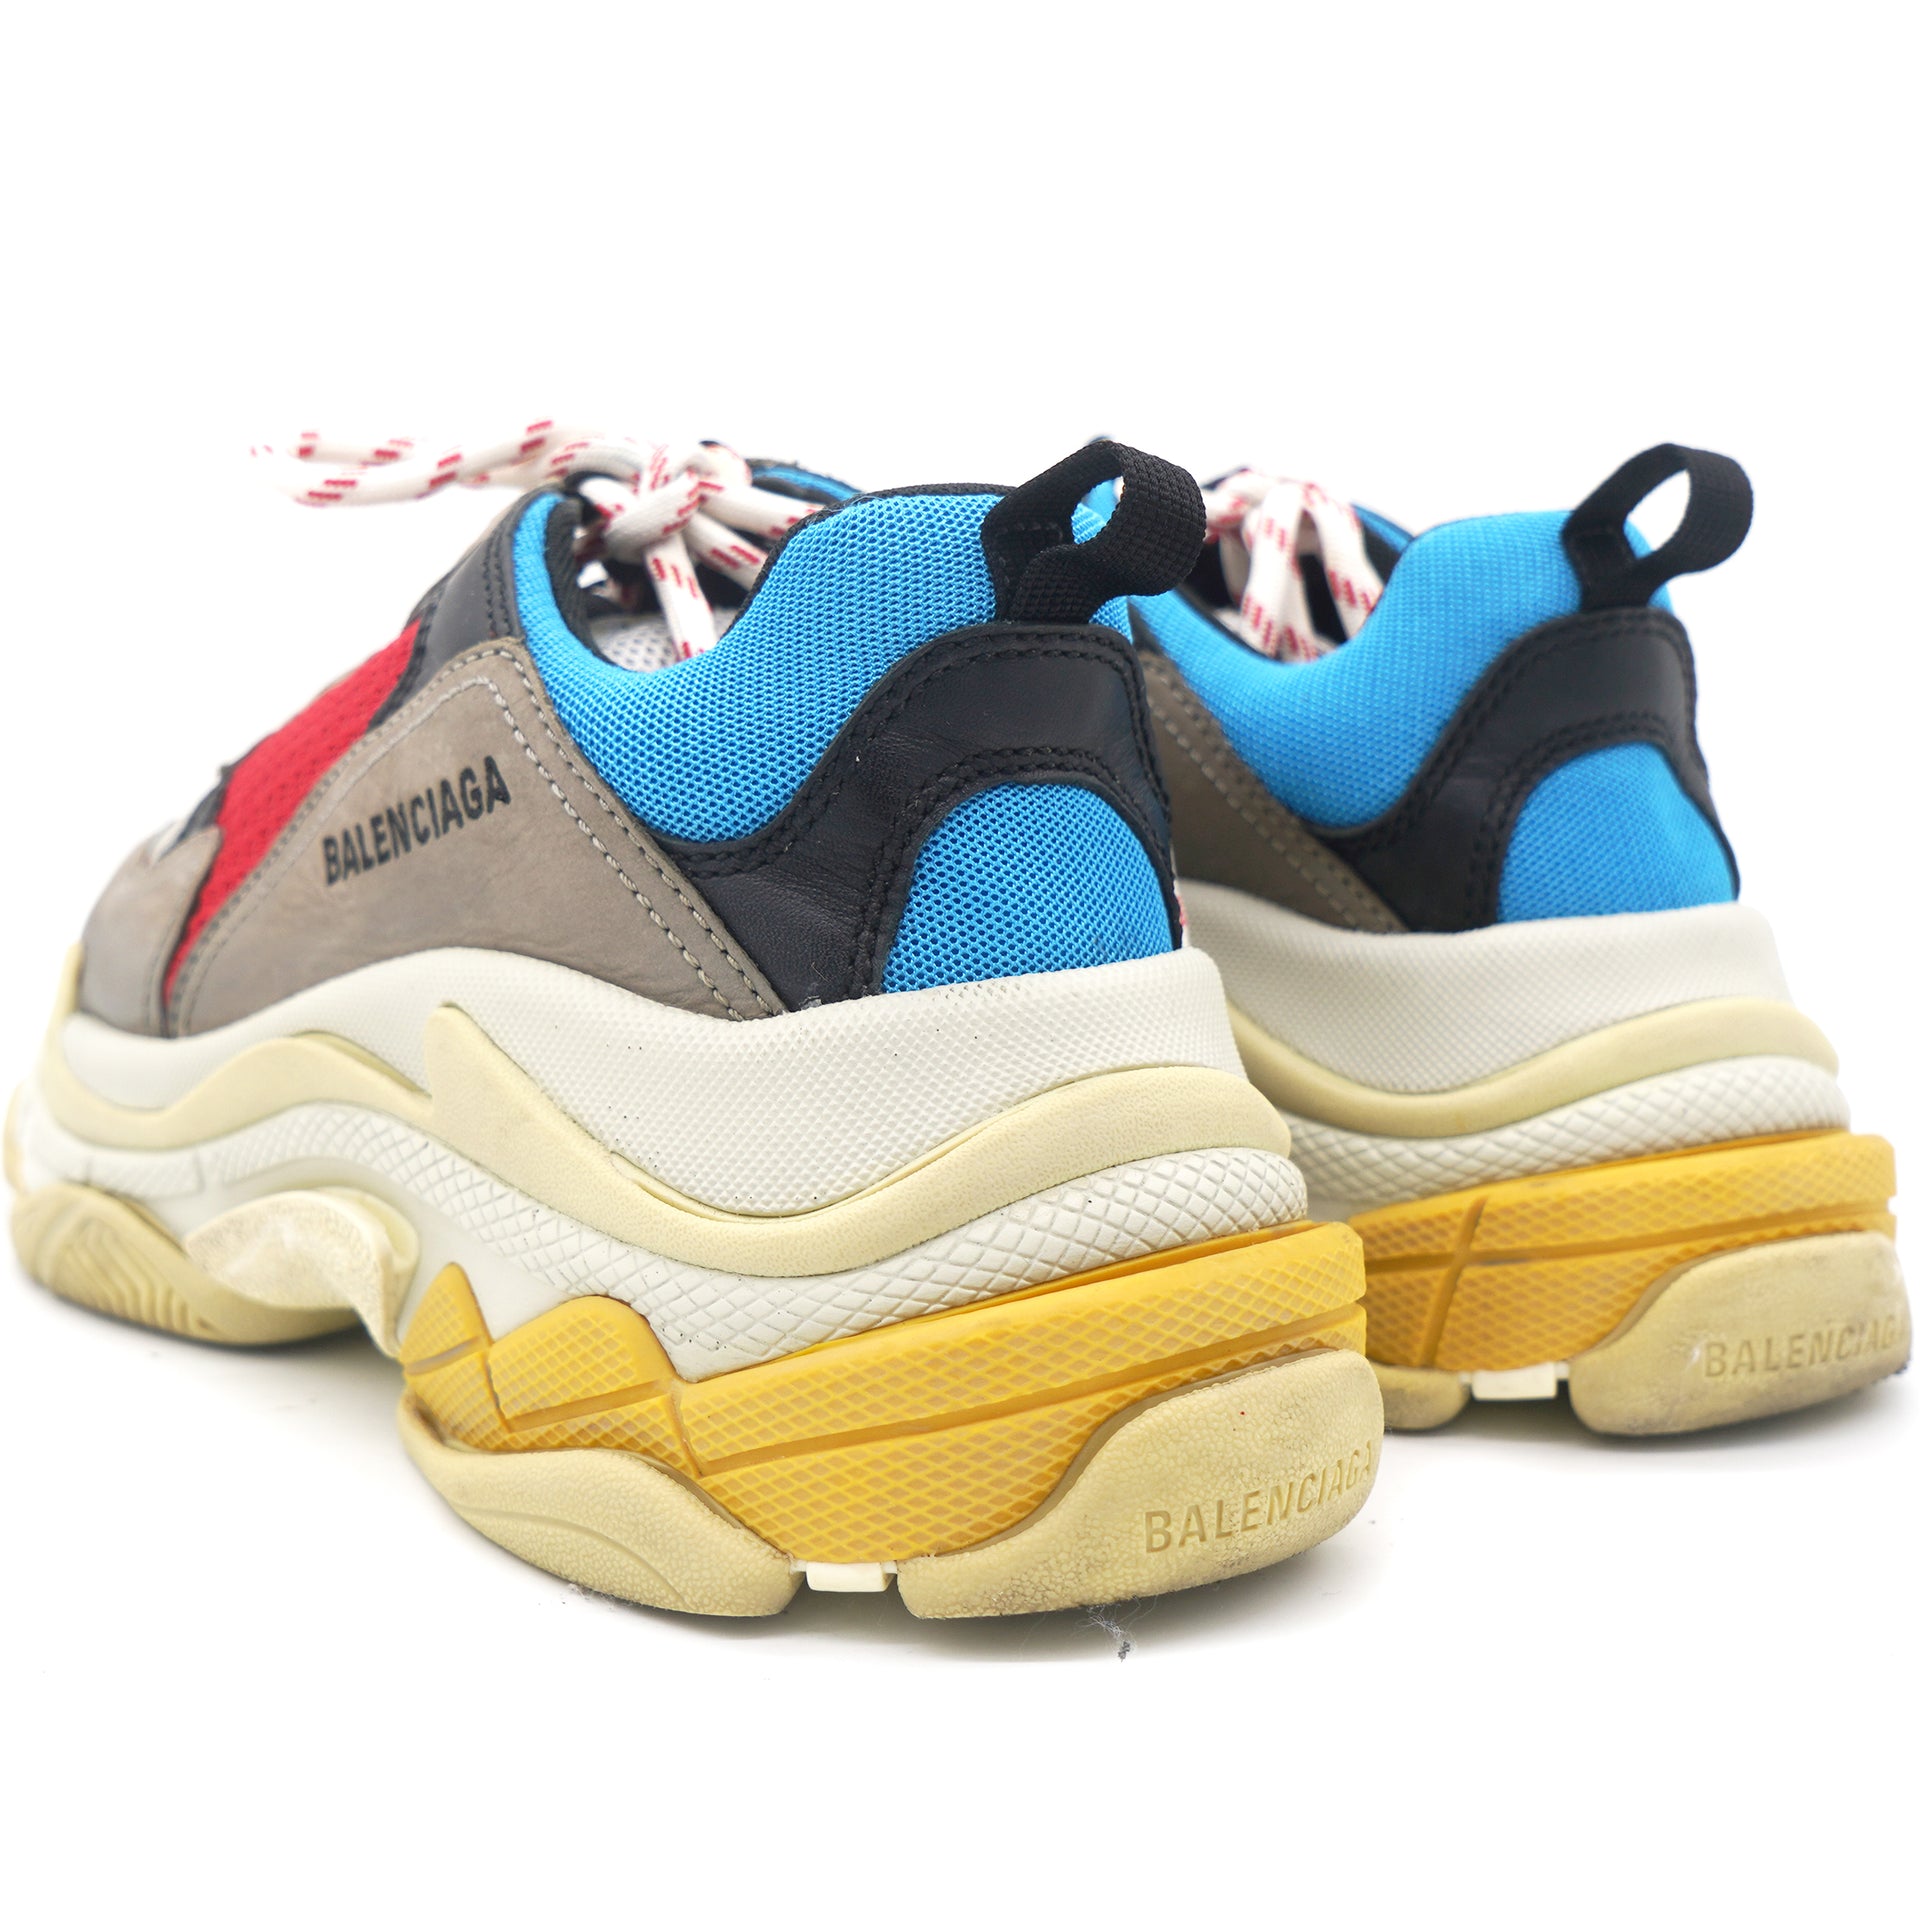 Available Now: Balenciaga Triple S in 'Red/Off-White' - Sneaker